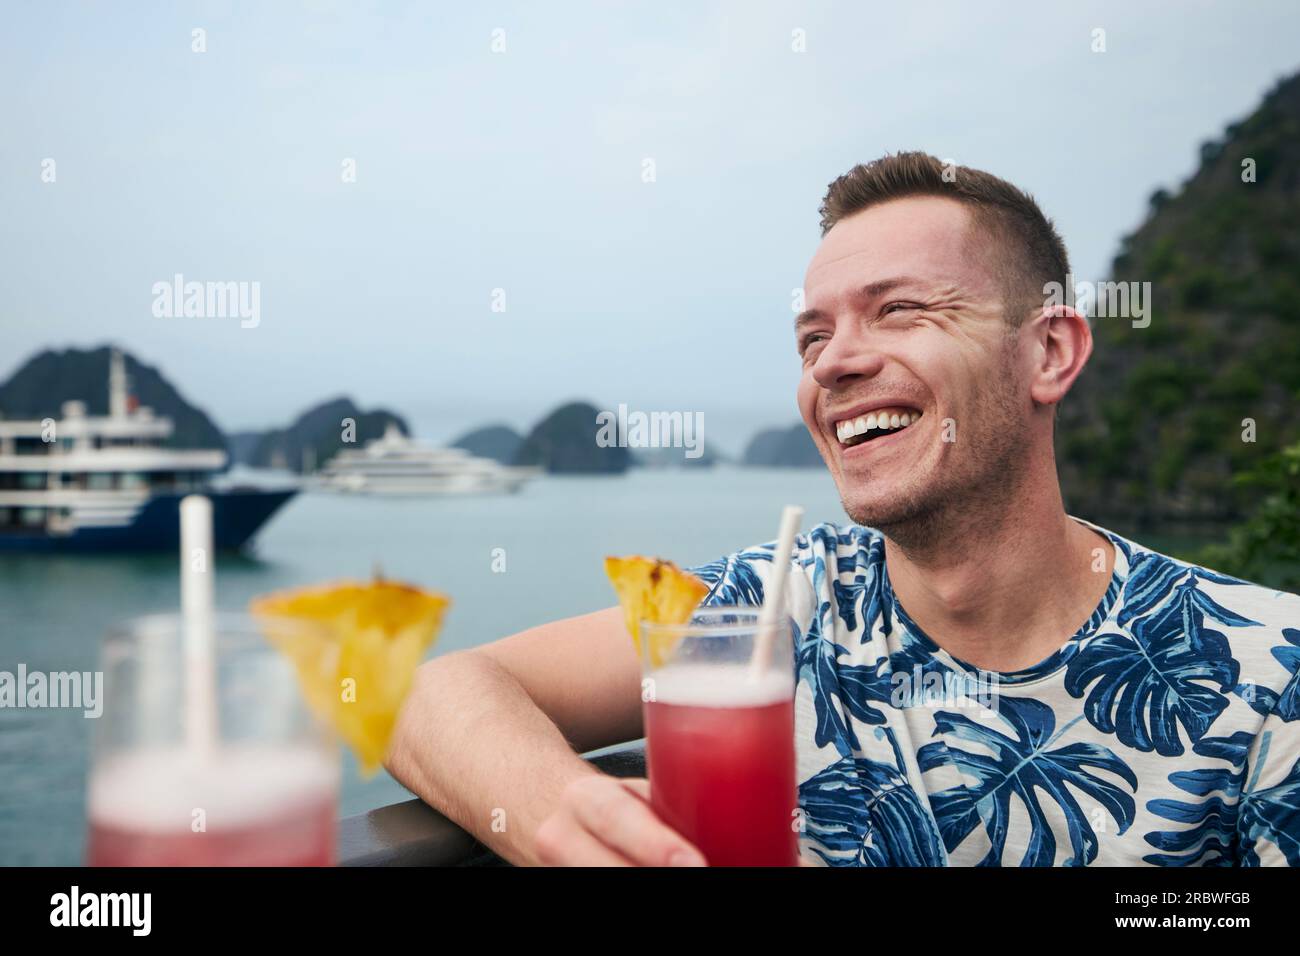 Portrait of smiling man with coctail drink in hand while. Traveler enjoying cruise on boat. Travel destination Ha long Bay, Vietnam. Stock Photo